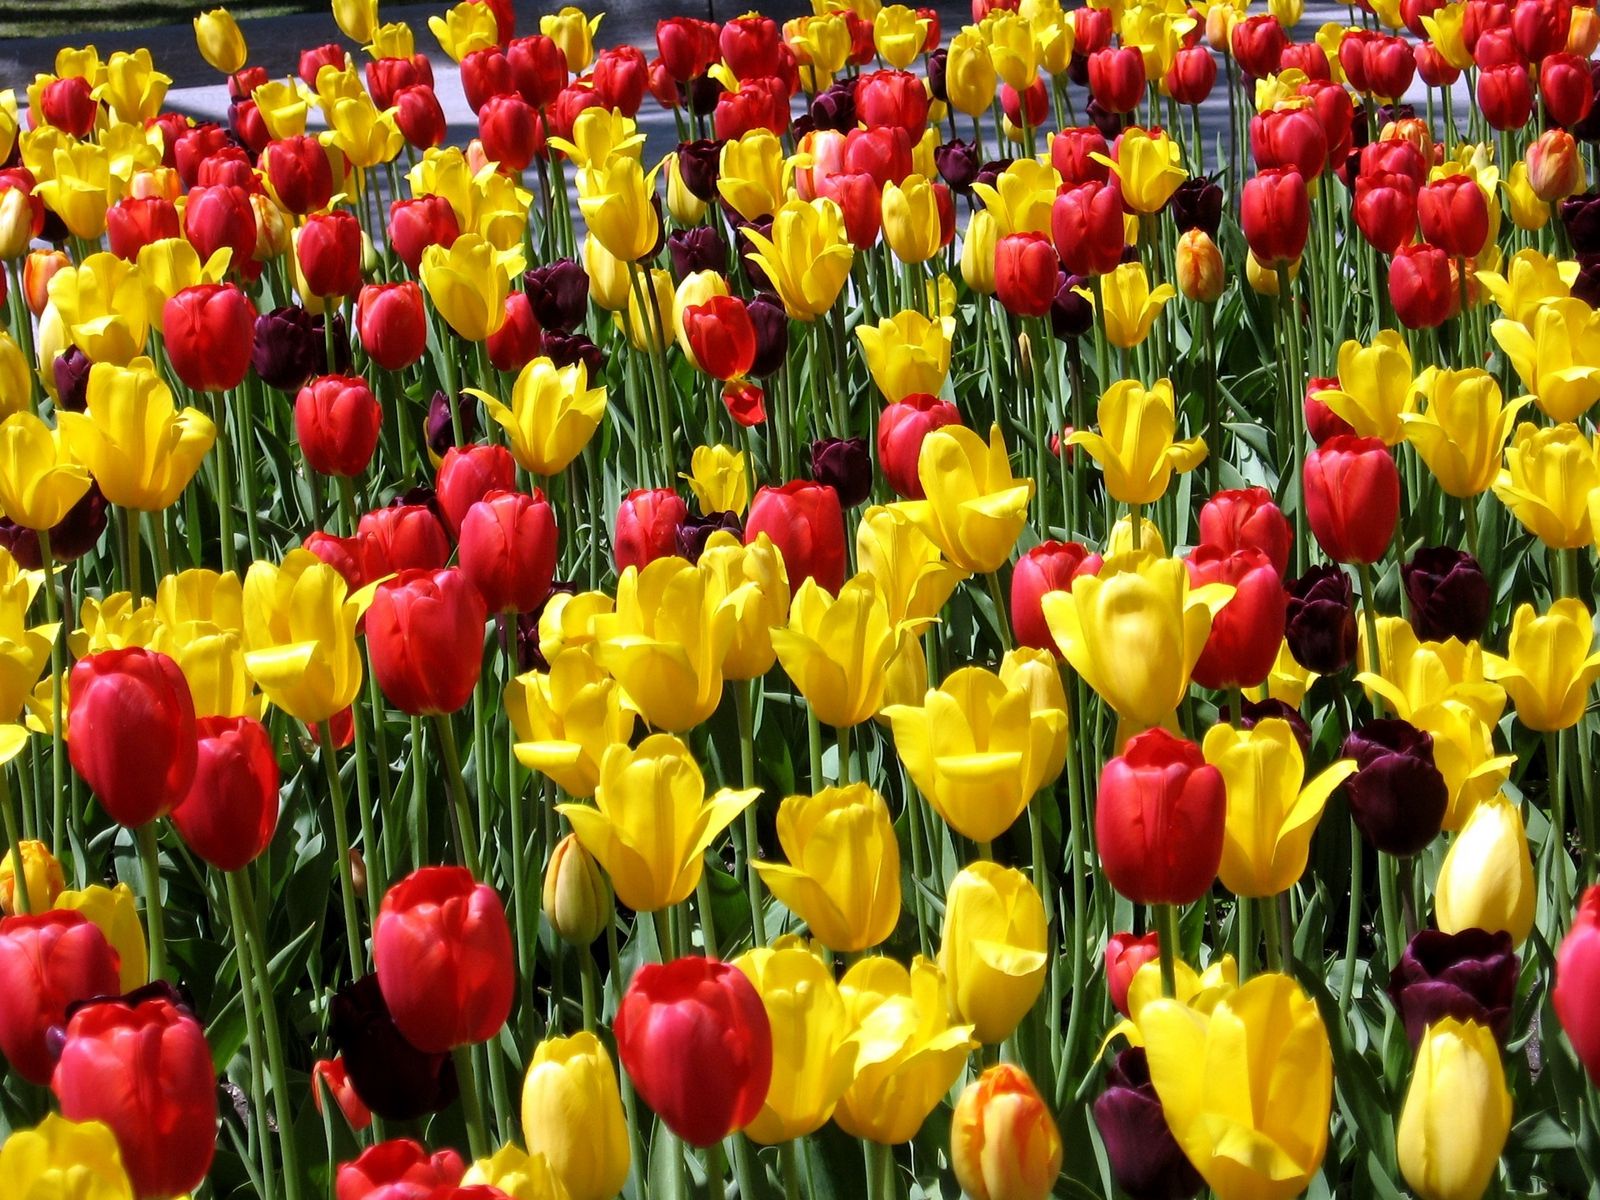 Download wallpaper 1600x1200 tulips, flowers, different, sunny